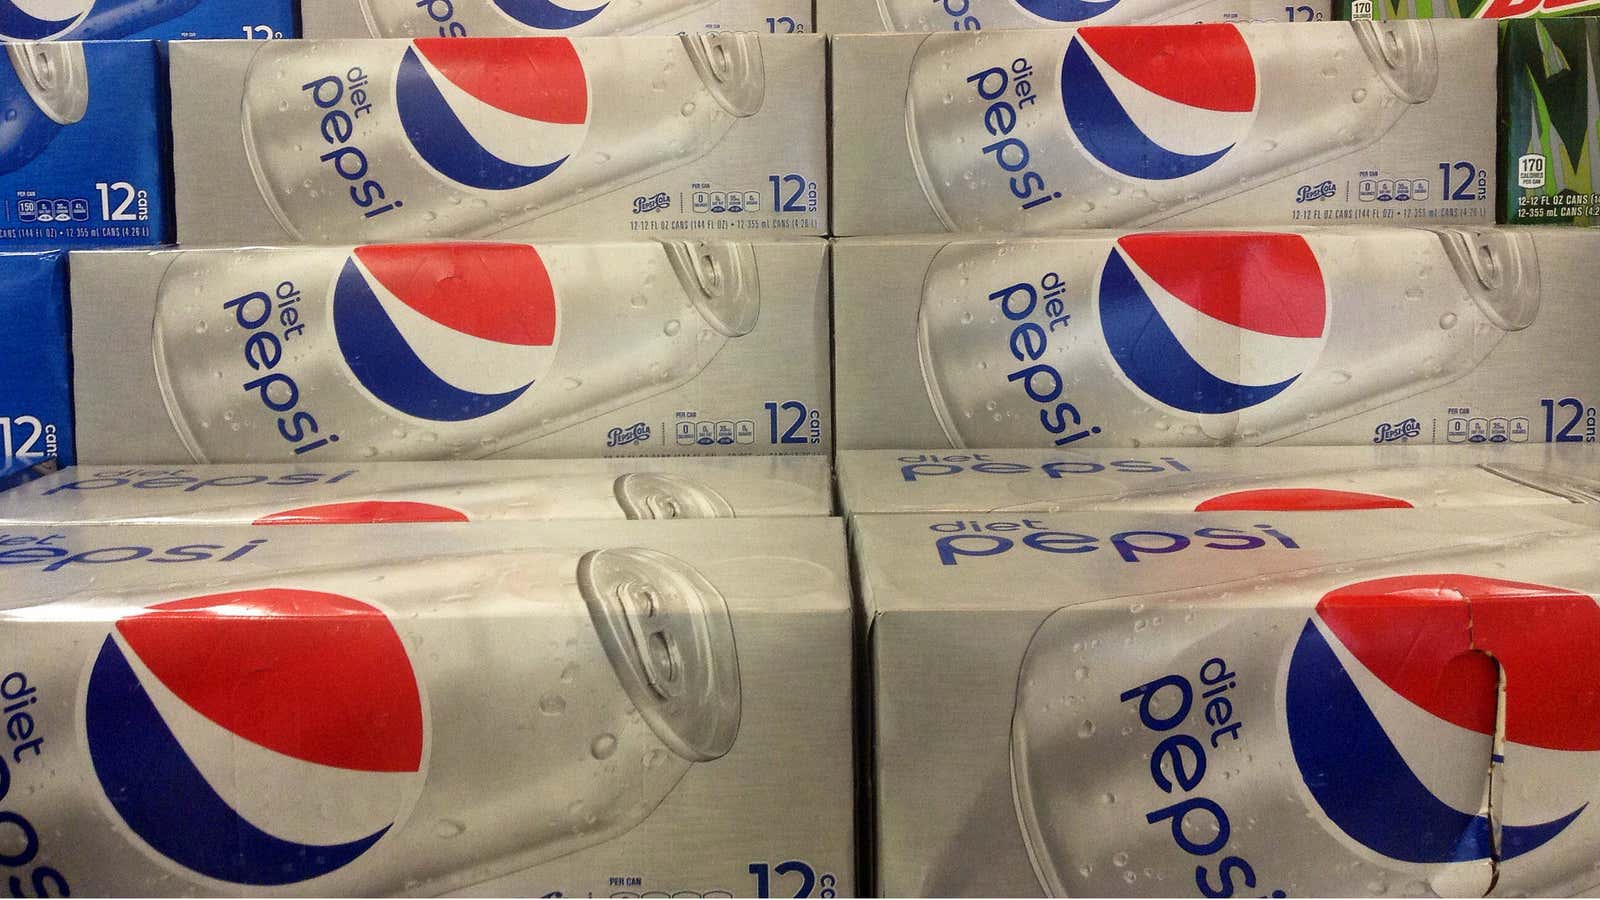 Step right up to the new Diet Pepsi.